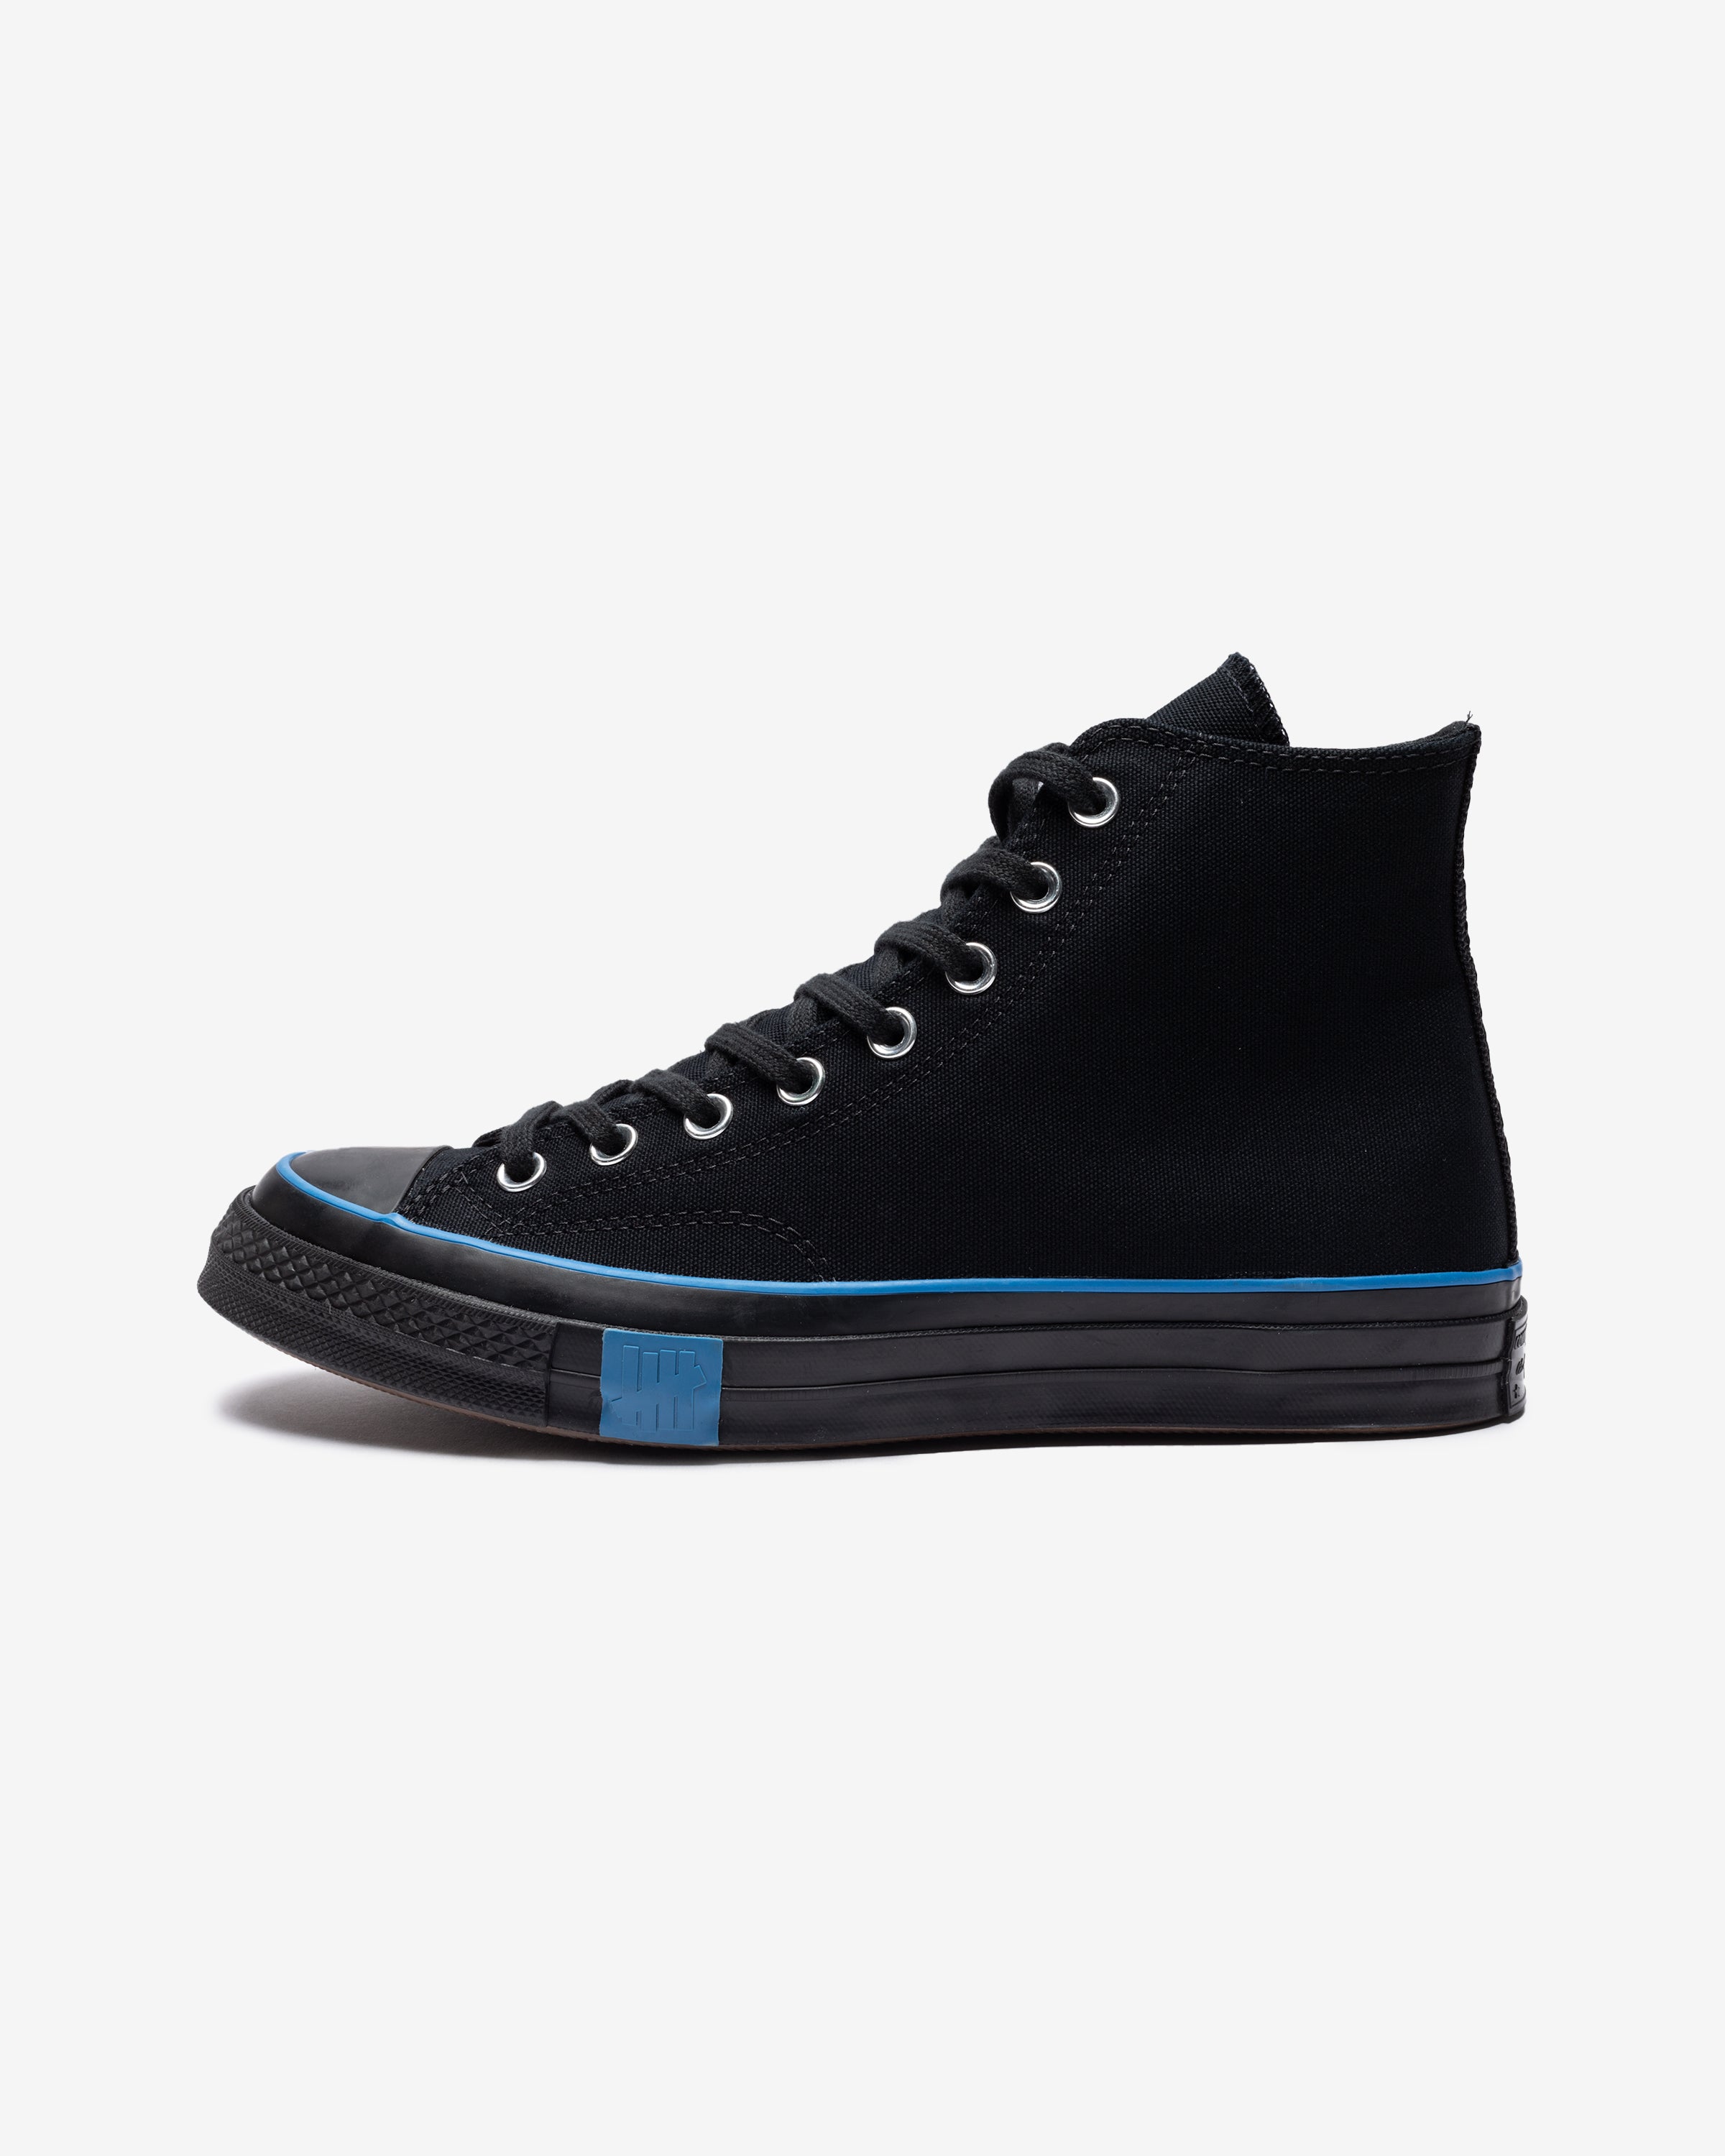 Converse X Undefeated Chuck 70 Hi Black Imperialblue Undefeated 